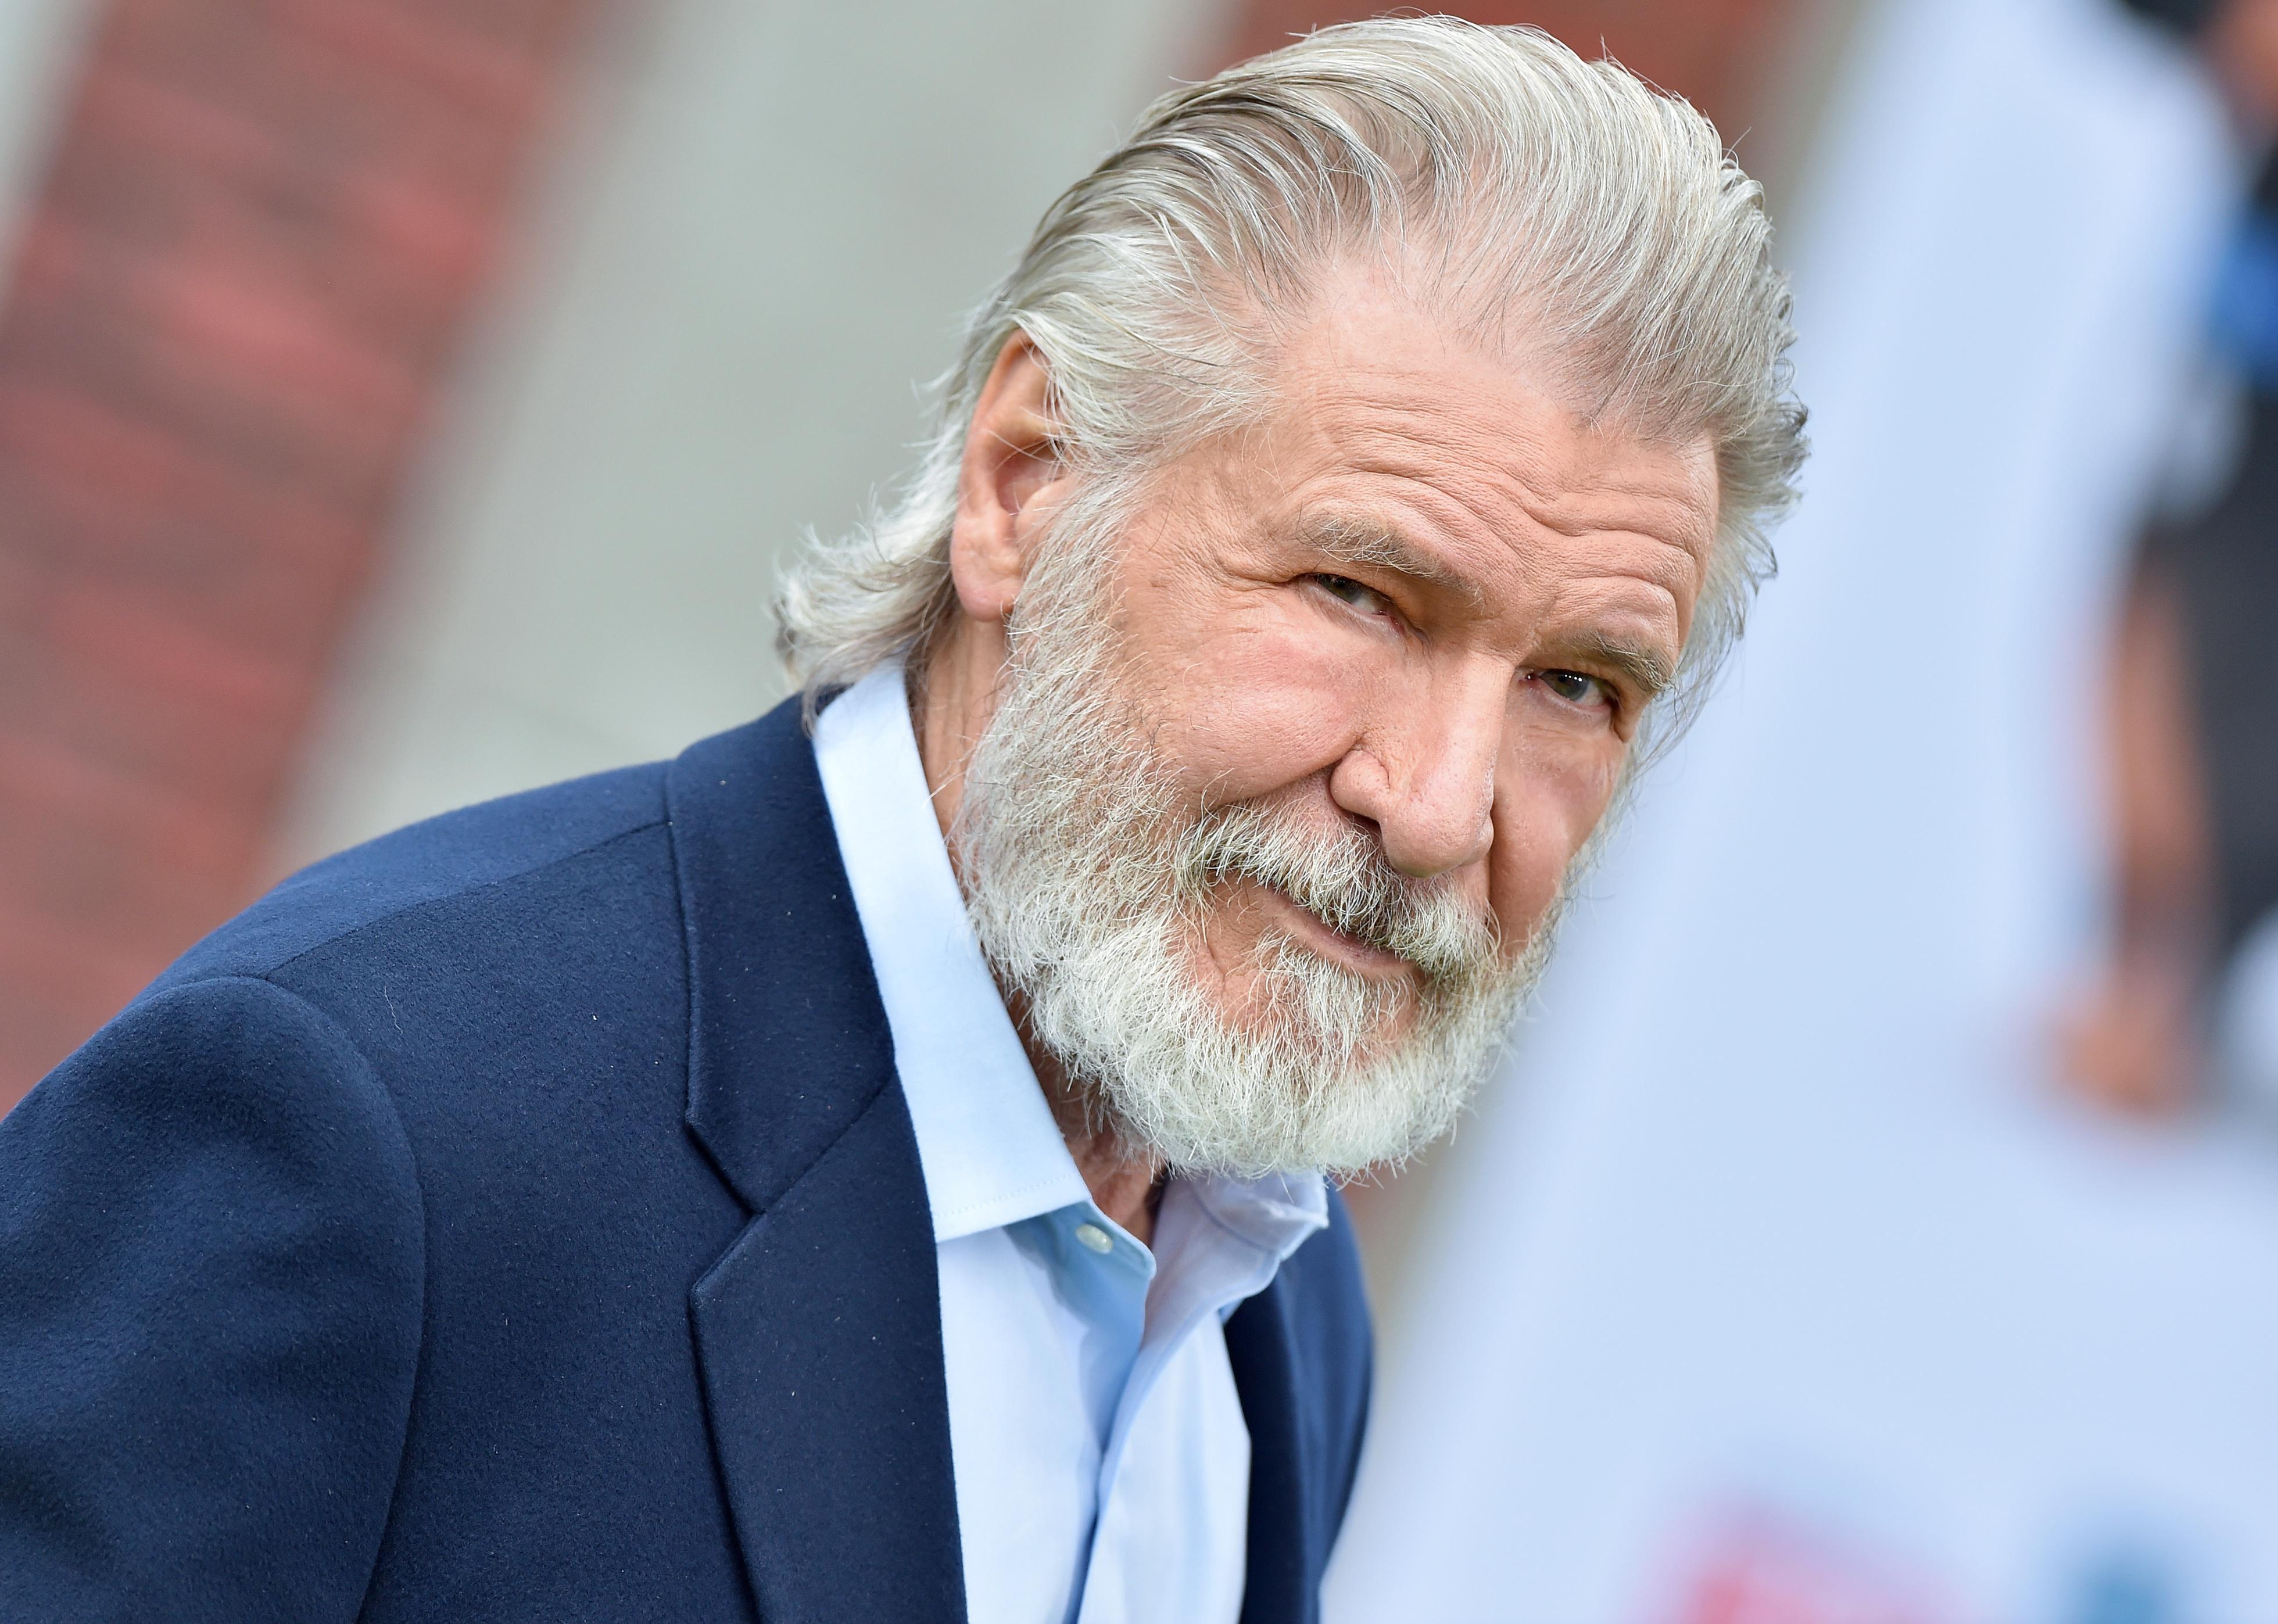 Harrison Ford in a navy suit with a full beard.